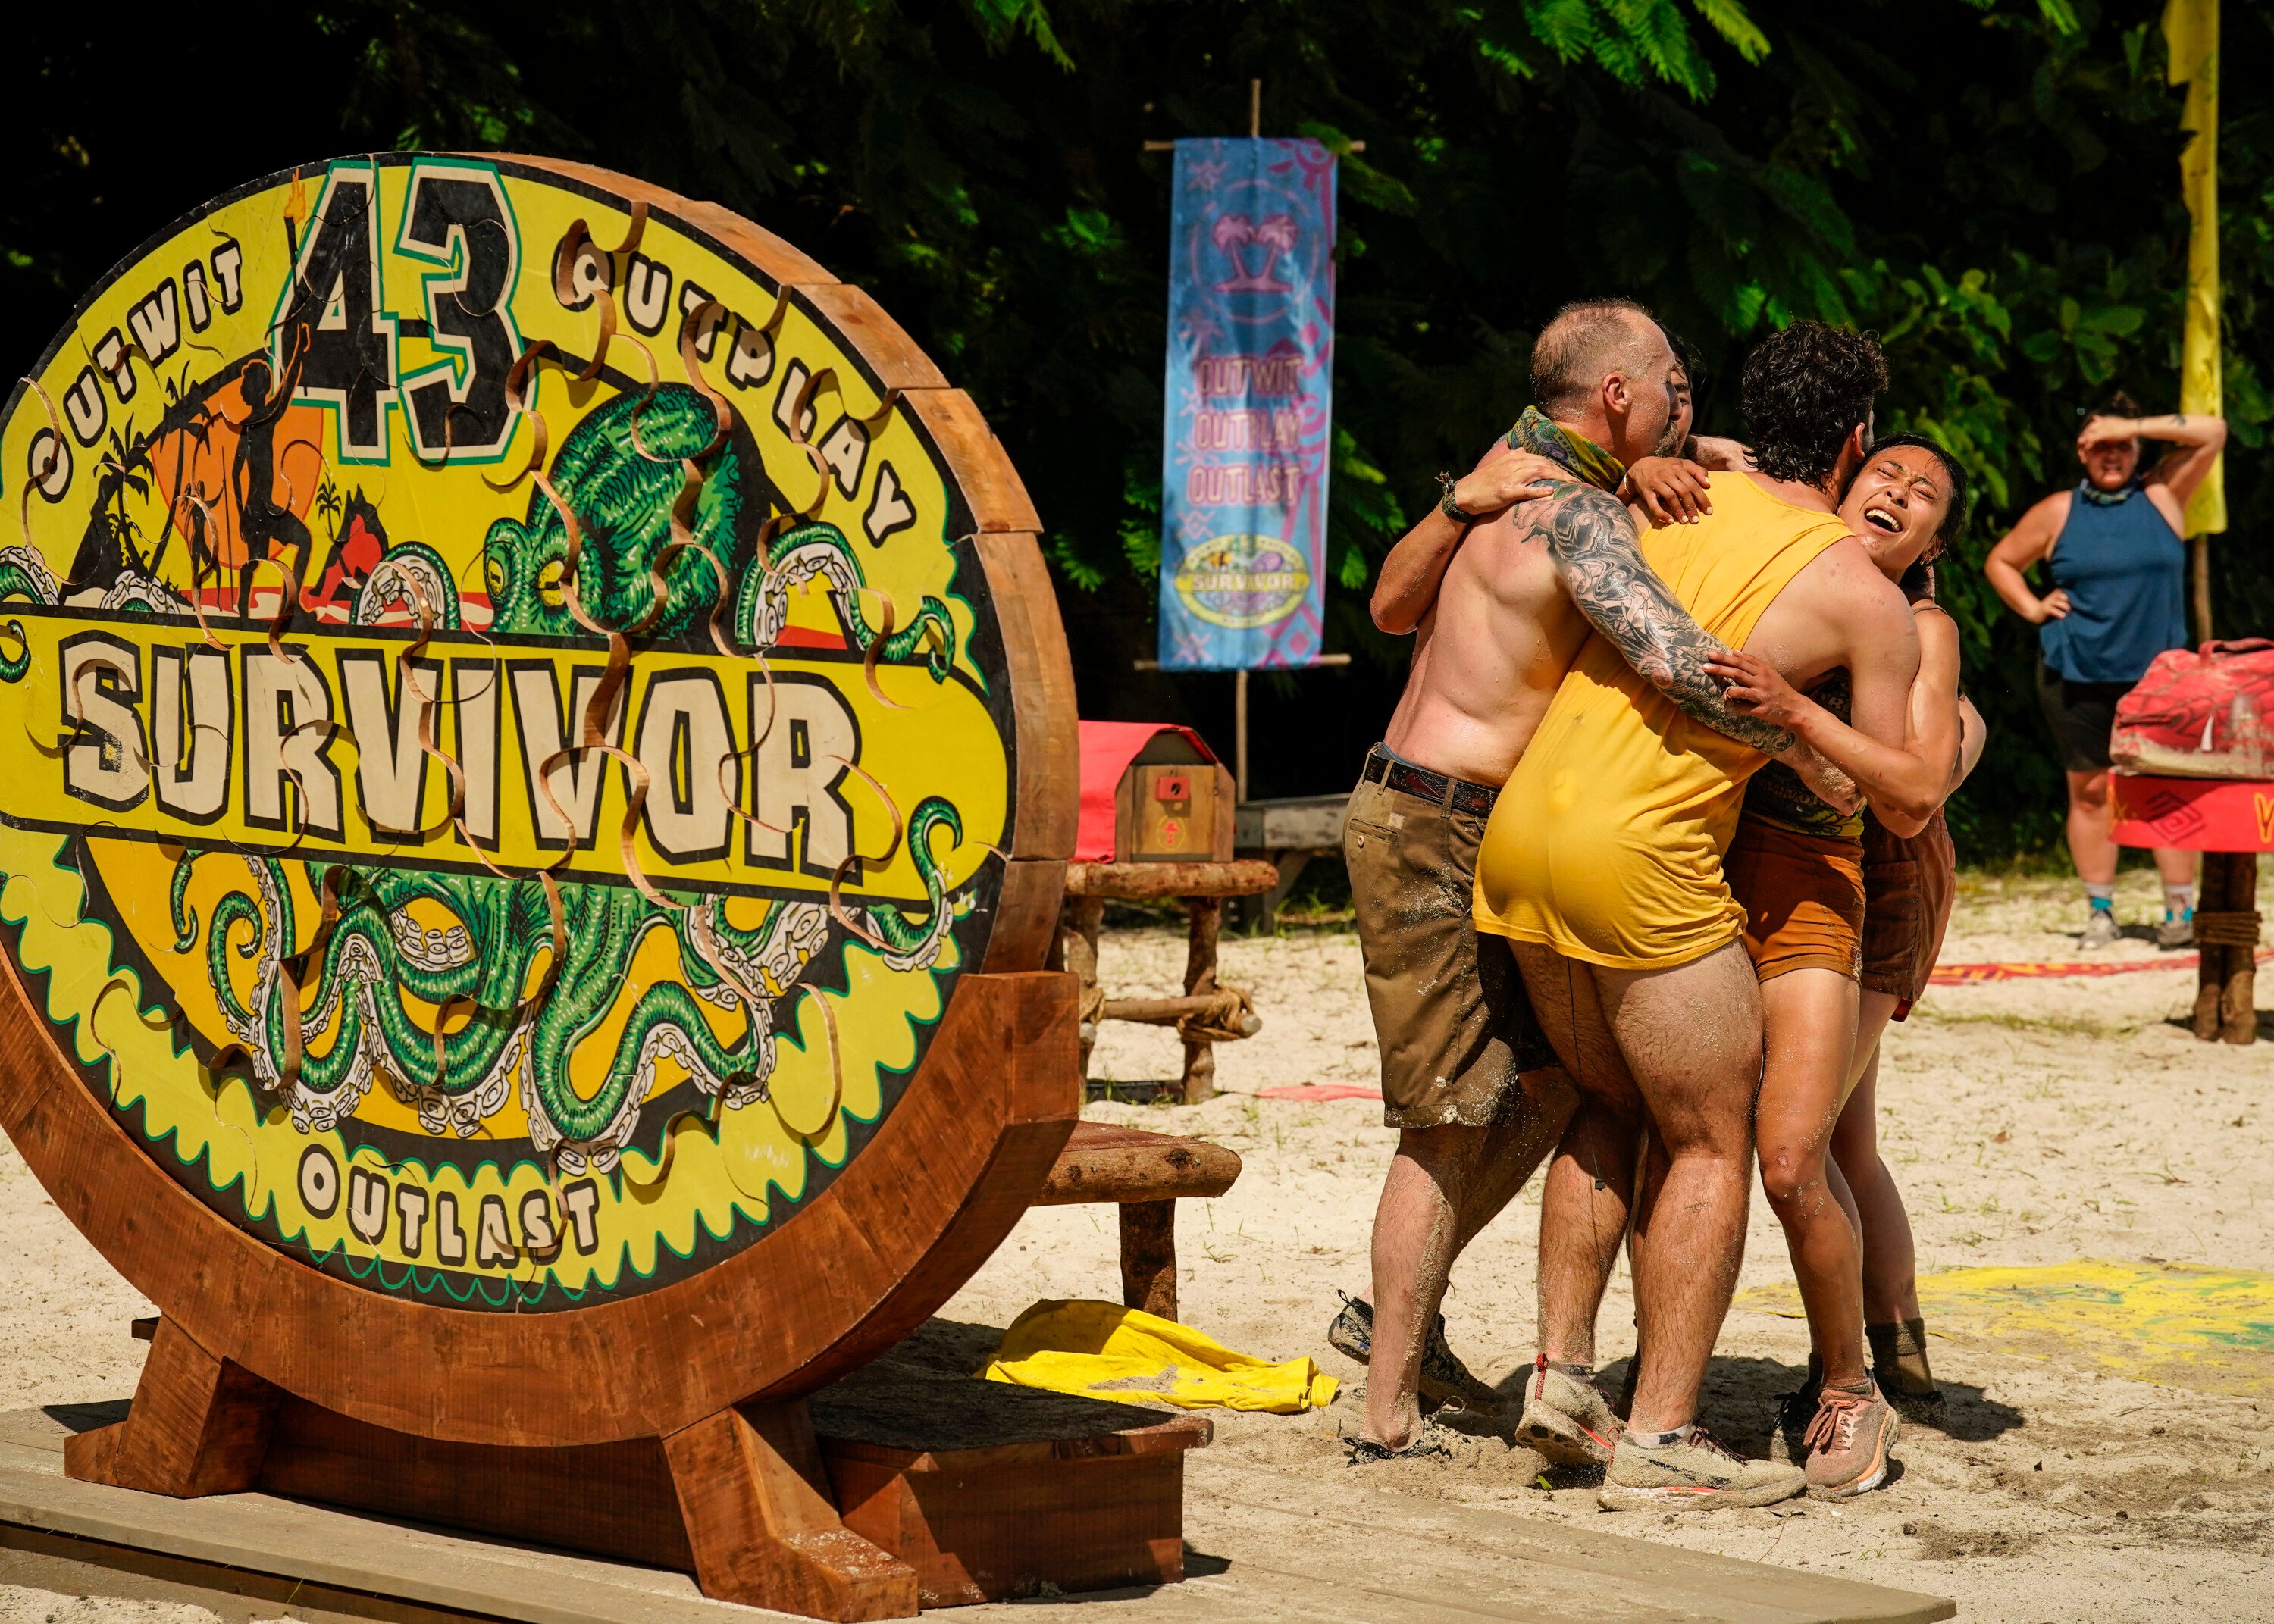 Mike Gabler, Sami Layadi, and Jeanine Zheng, who are a part of the Baka tribe, celebrate with their fellow tribemates following a 'Survivor' Season 43 challenge. The group is hugging.